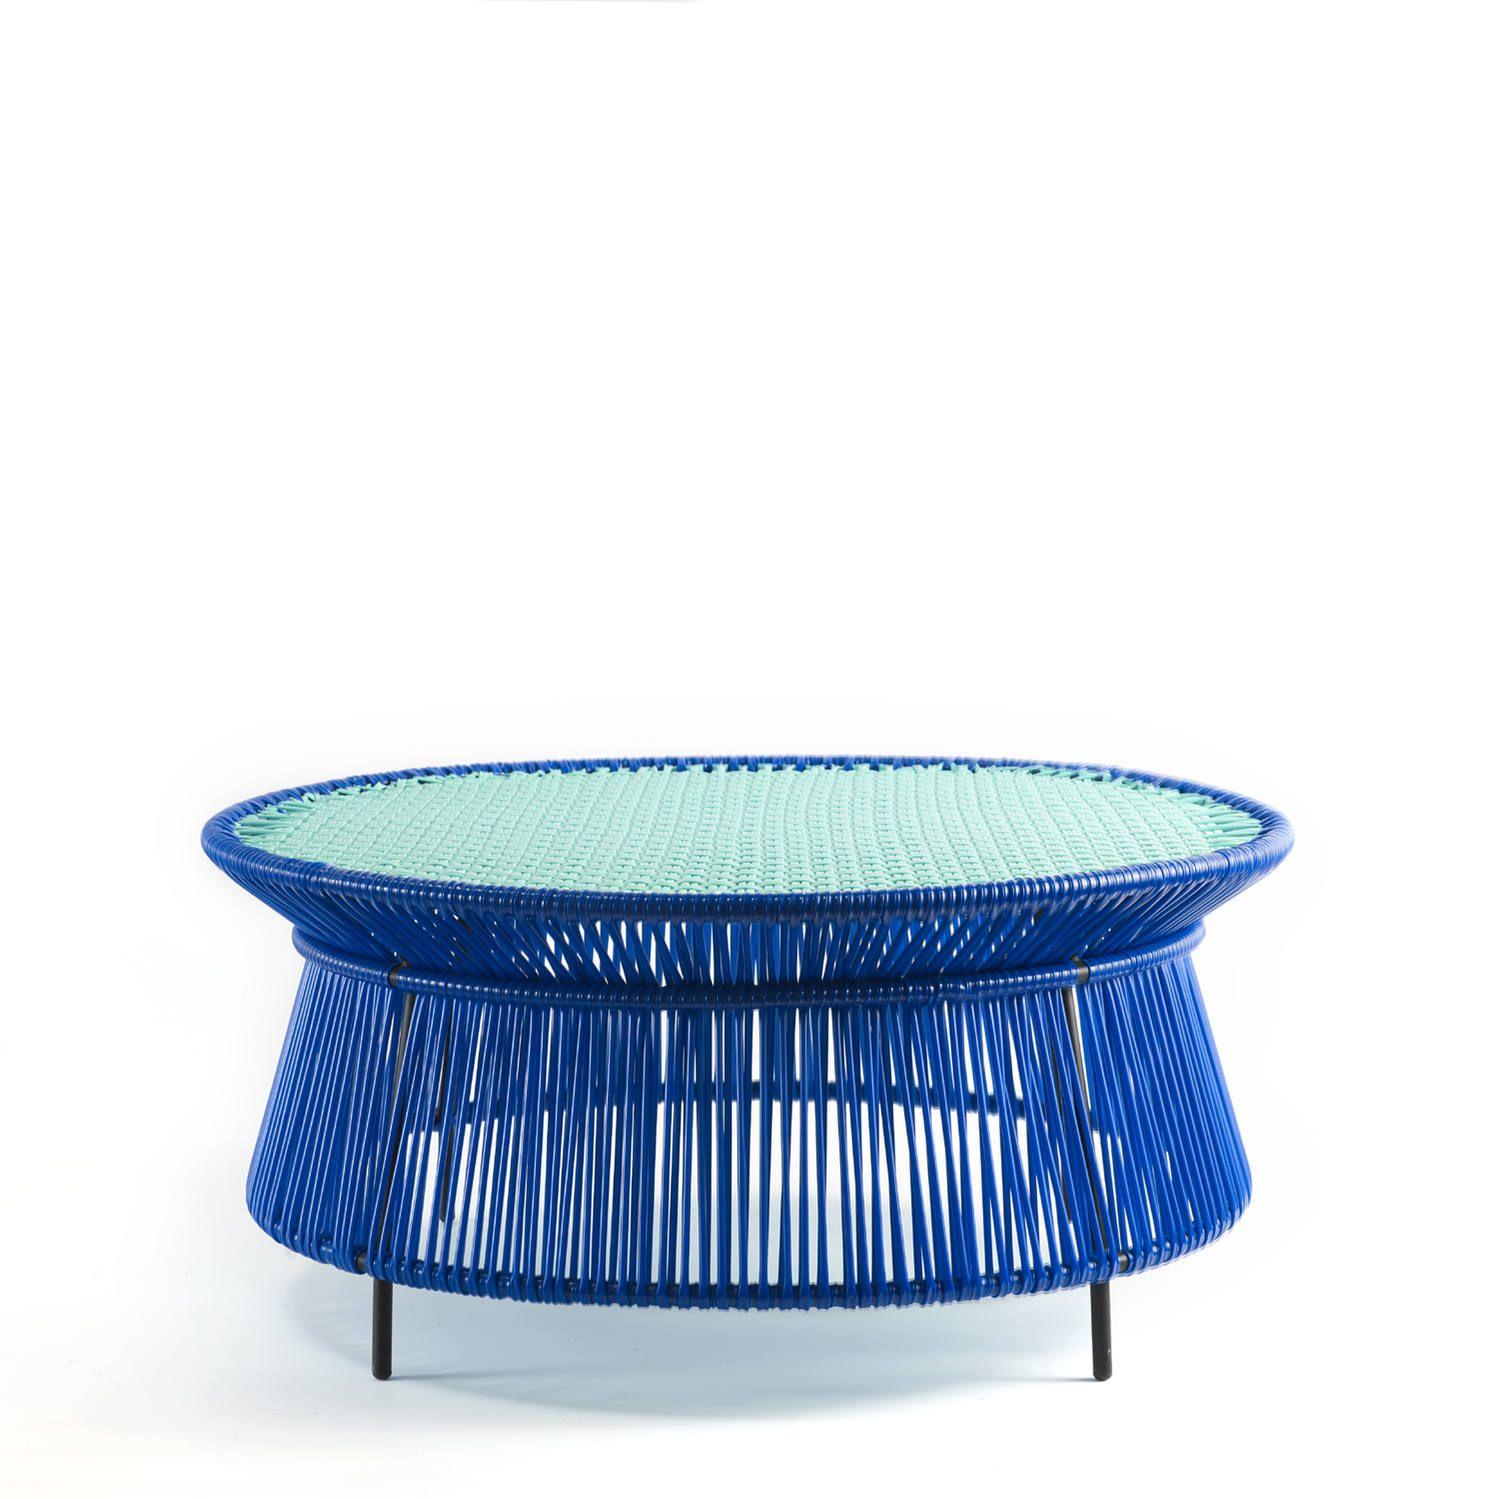 The charming Caribe Low Side Table is a colorful companion for seating arrangements inside and outdoors.It’s part of the Caribe collection, designed by Sebastian Herkner for ames. The German designer visited Colombia together with ames founder Ana